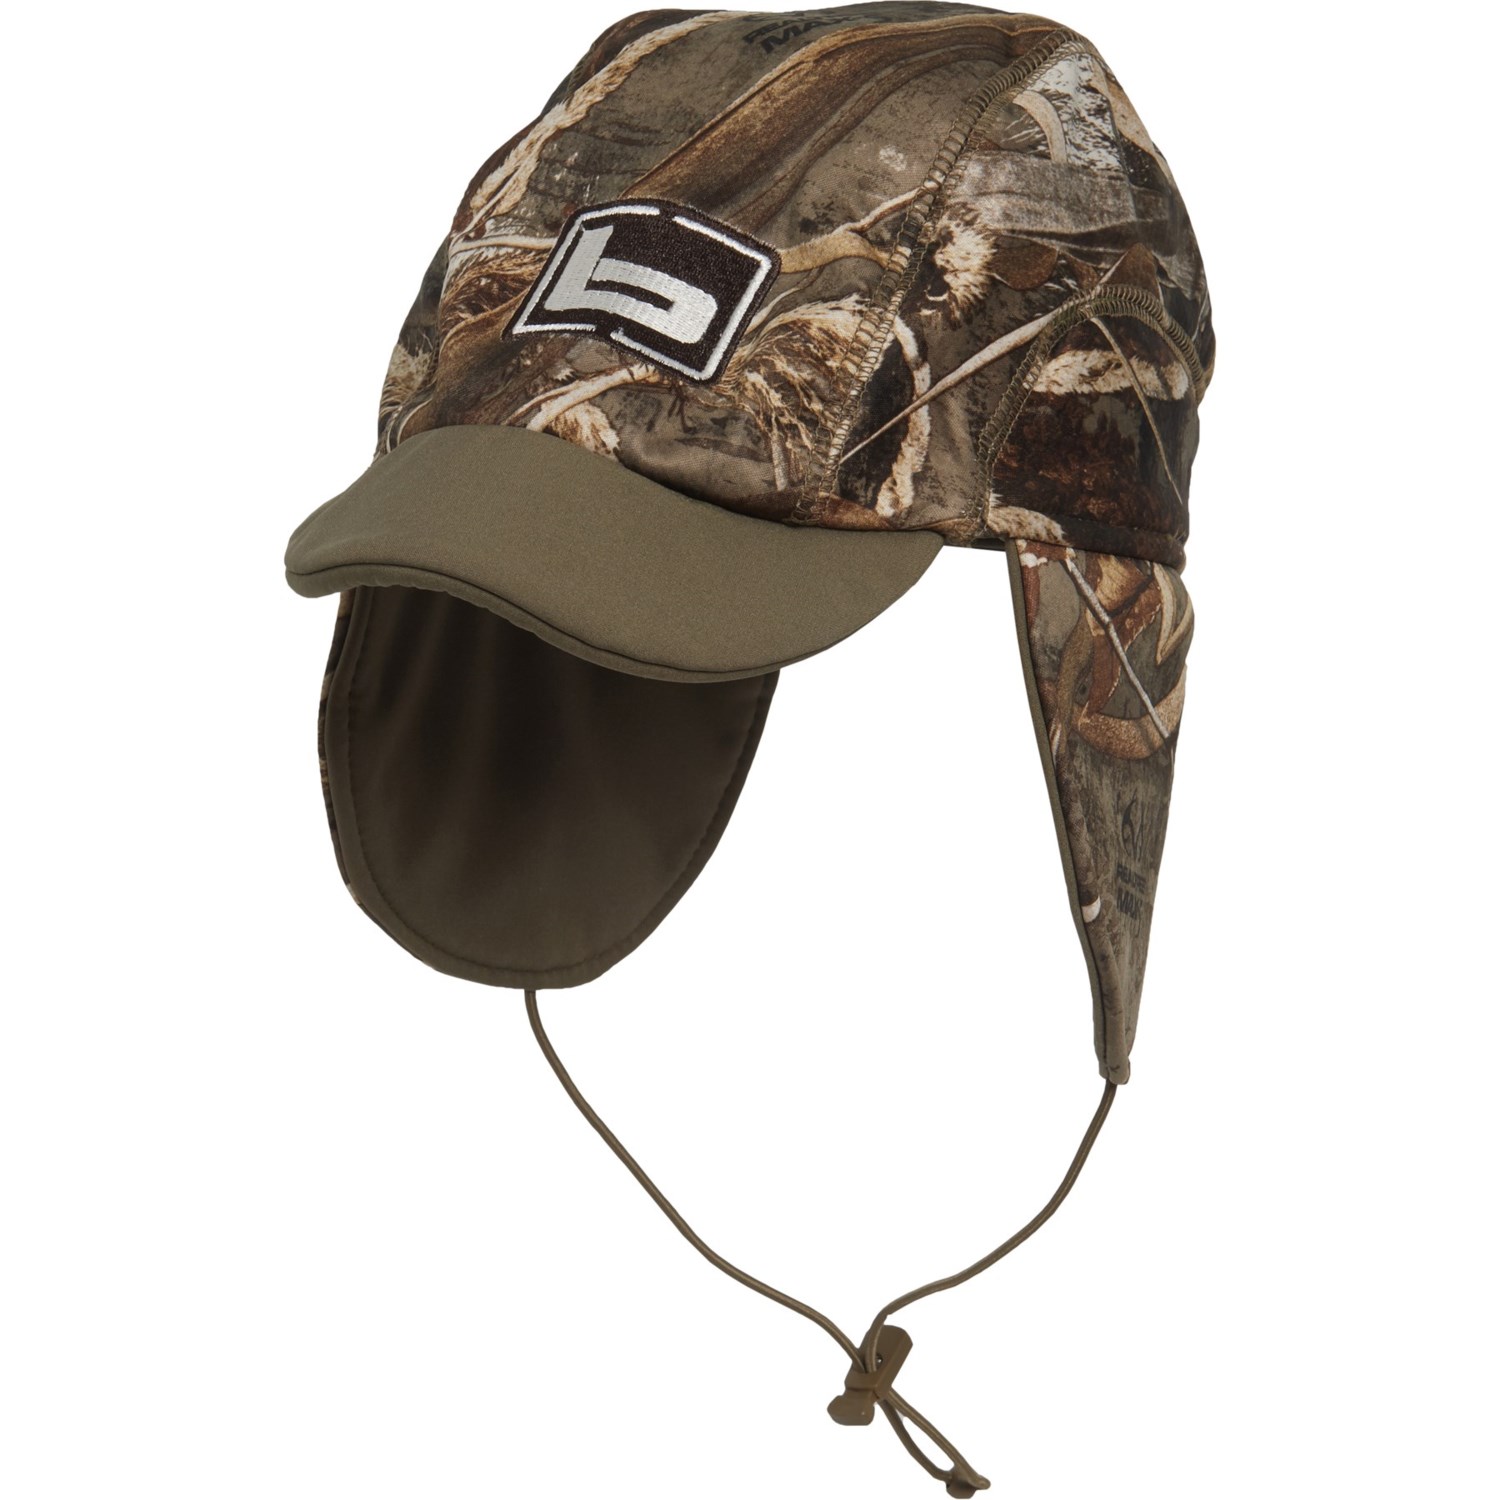 Banded Atchafalaya Soft Shell Brimmed Hunting Hat For Men In Realtree Max 5~p~752yv 01~1500.2 